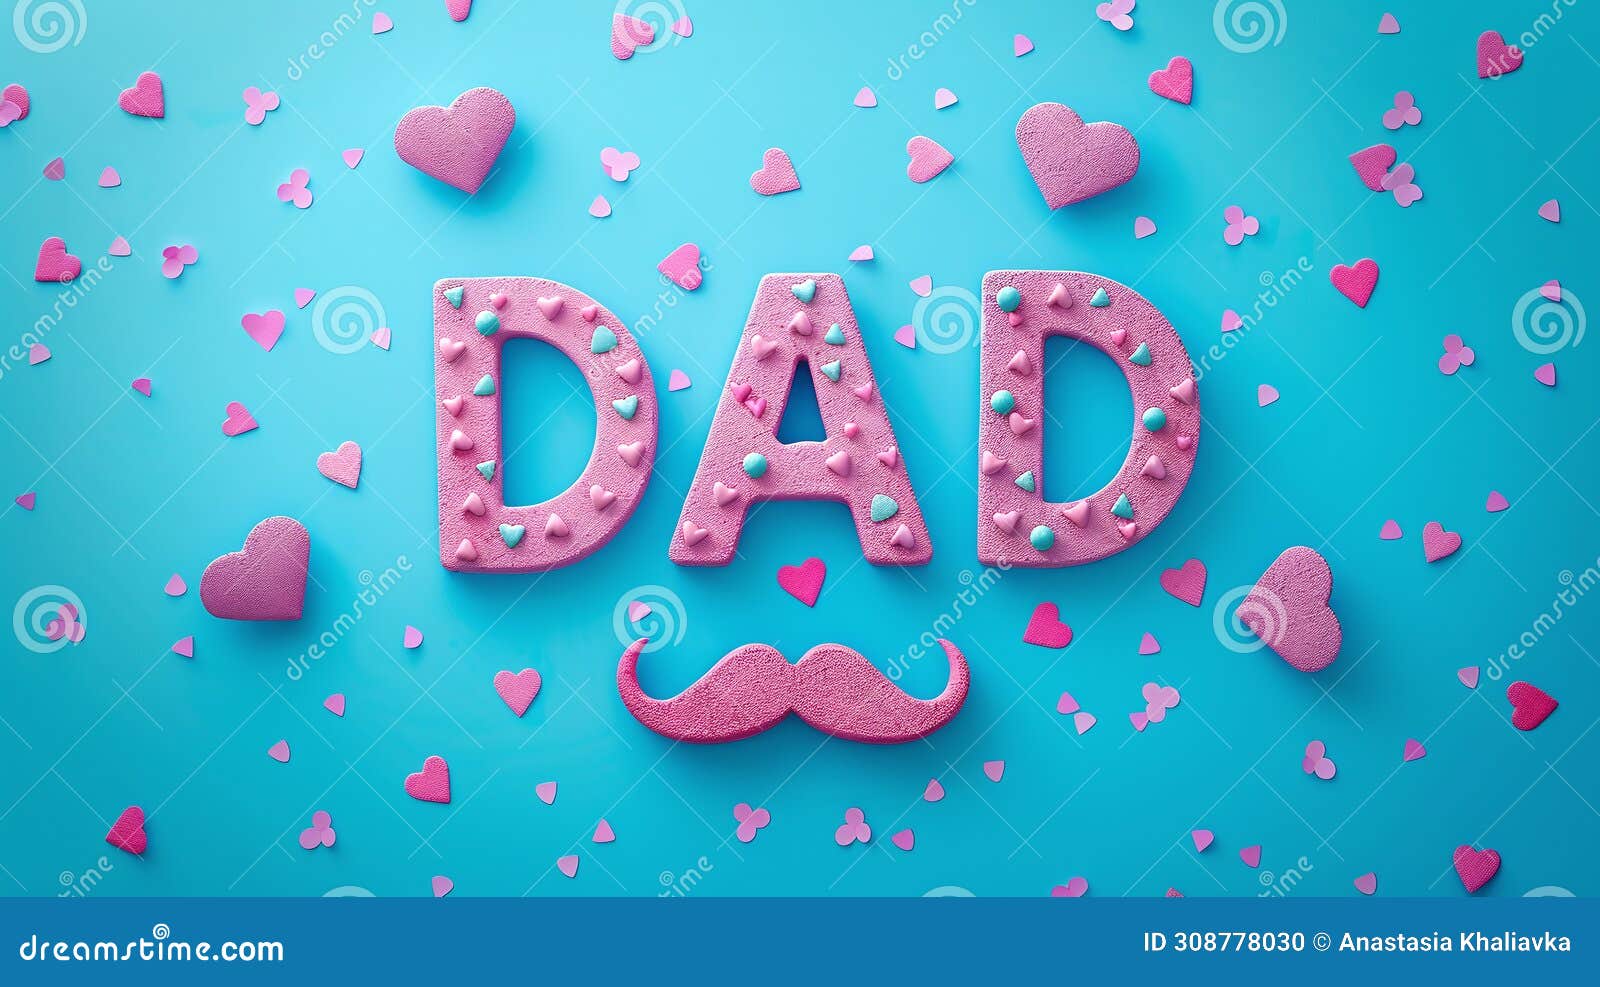 happy father's day. greeting cards, word dad from pink tree on blue one-tone background with hearts